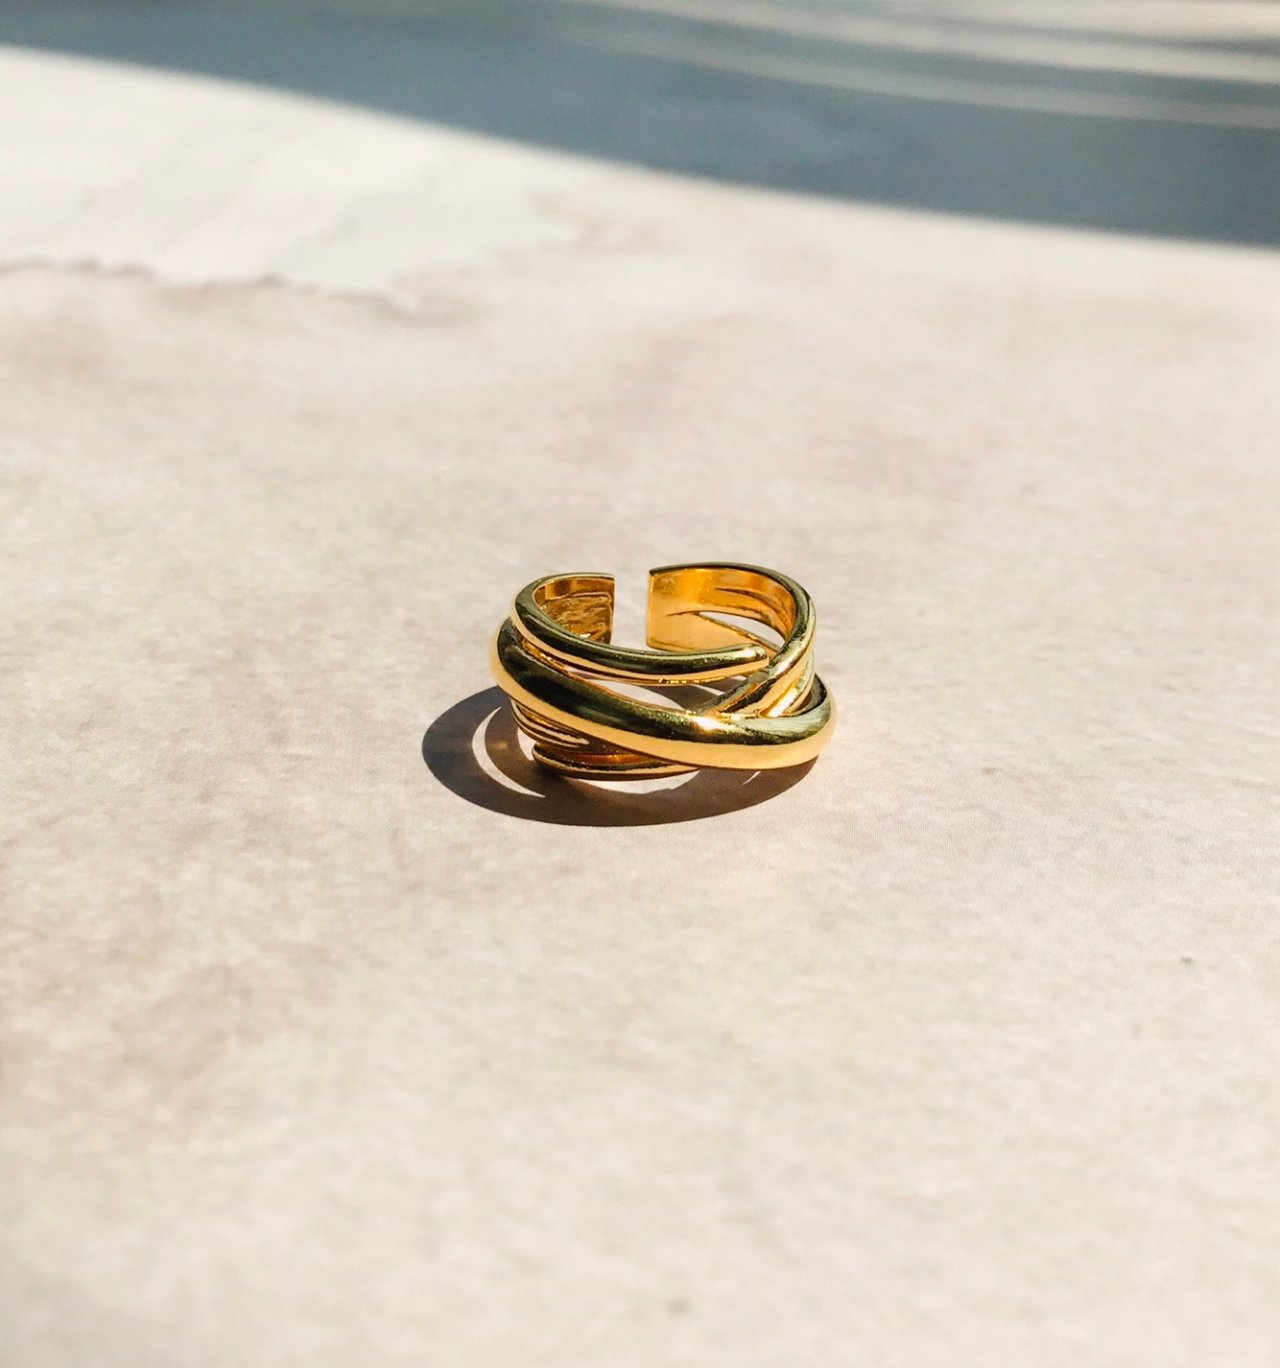 Trio Ring in Gold